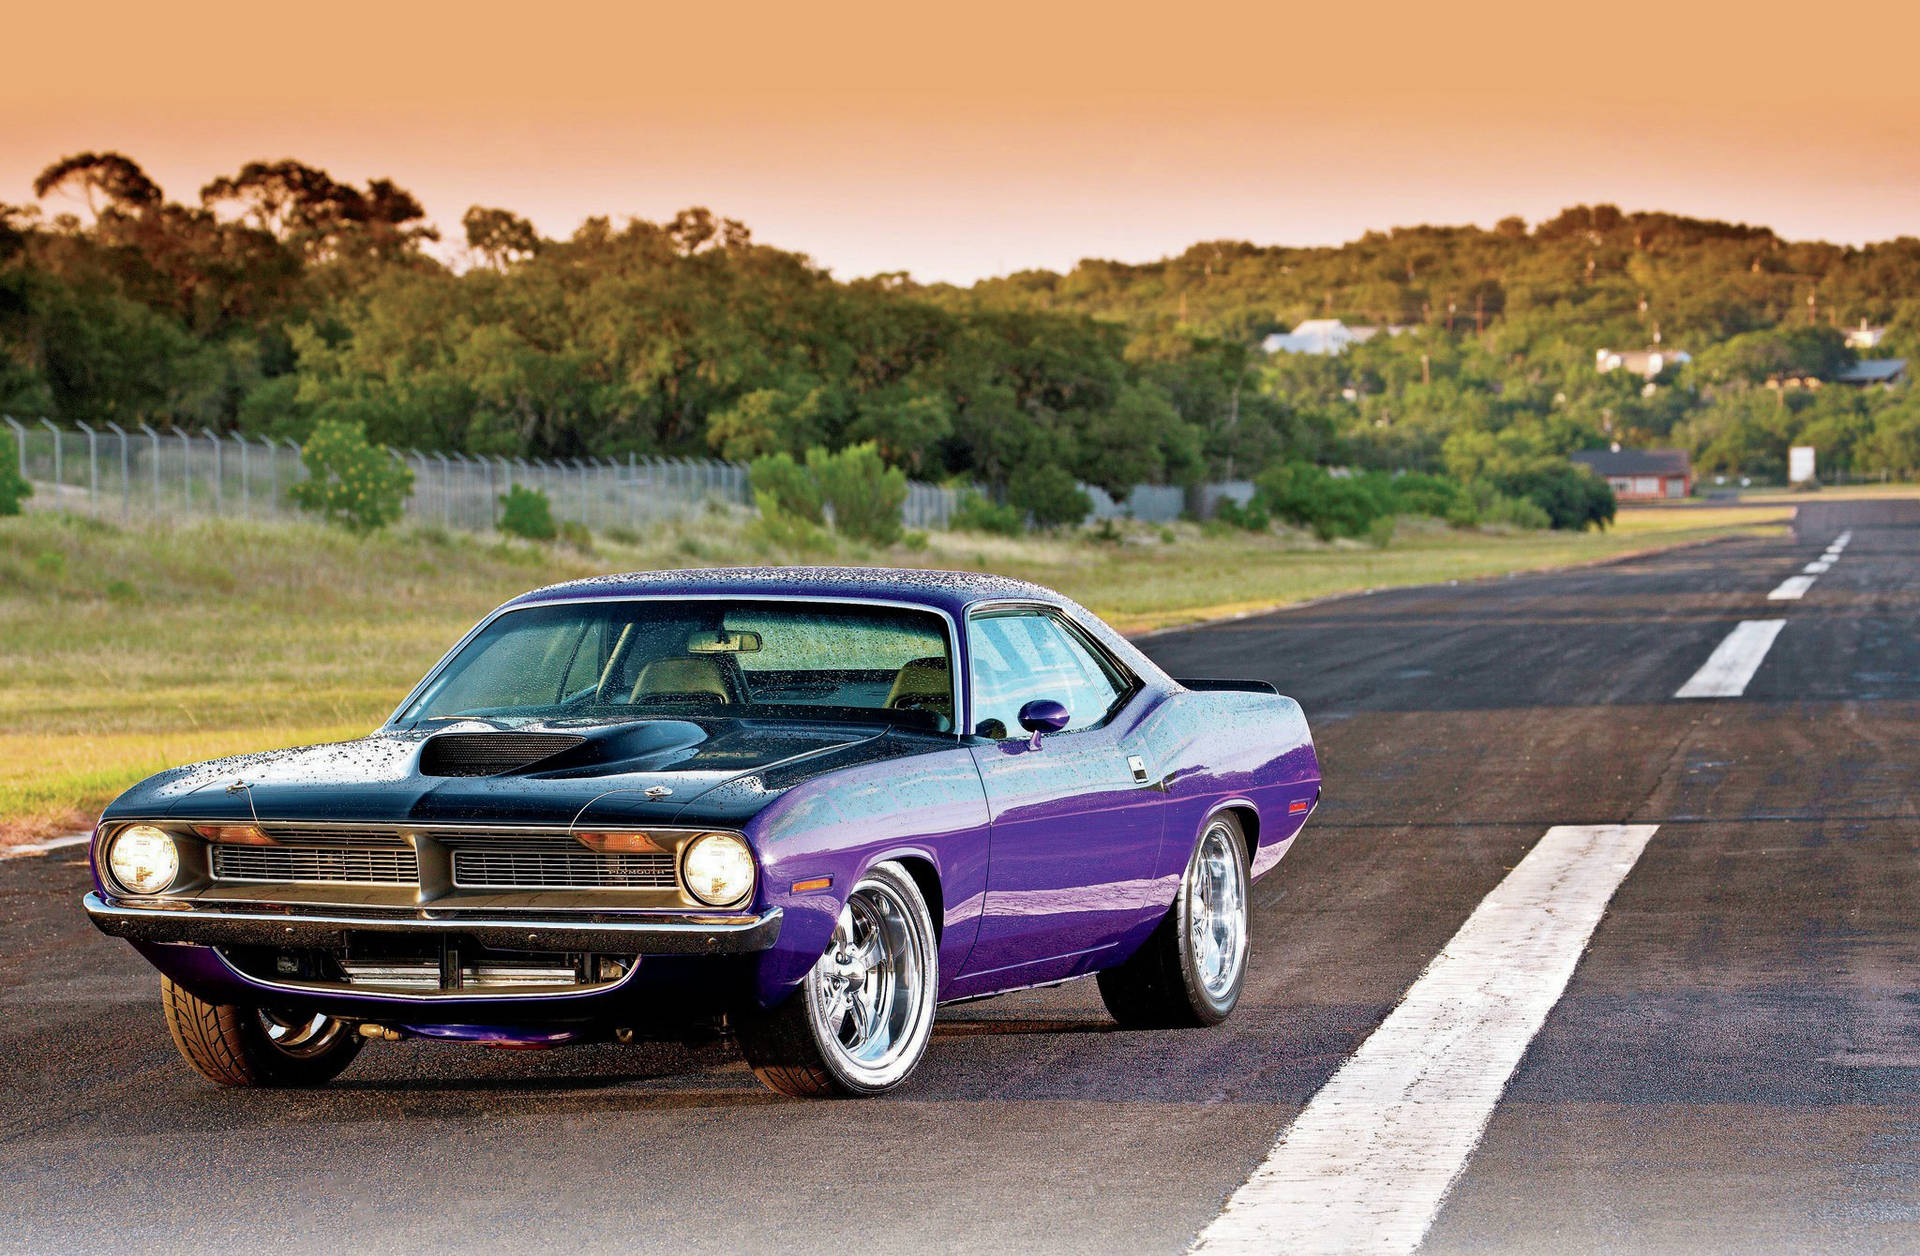 Violet Plymouth Barracuda On The Road